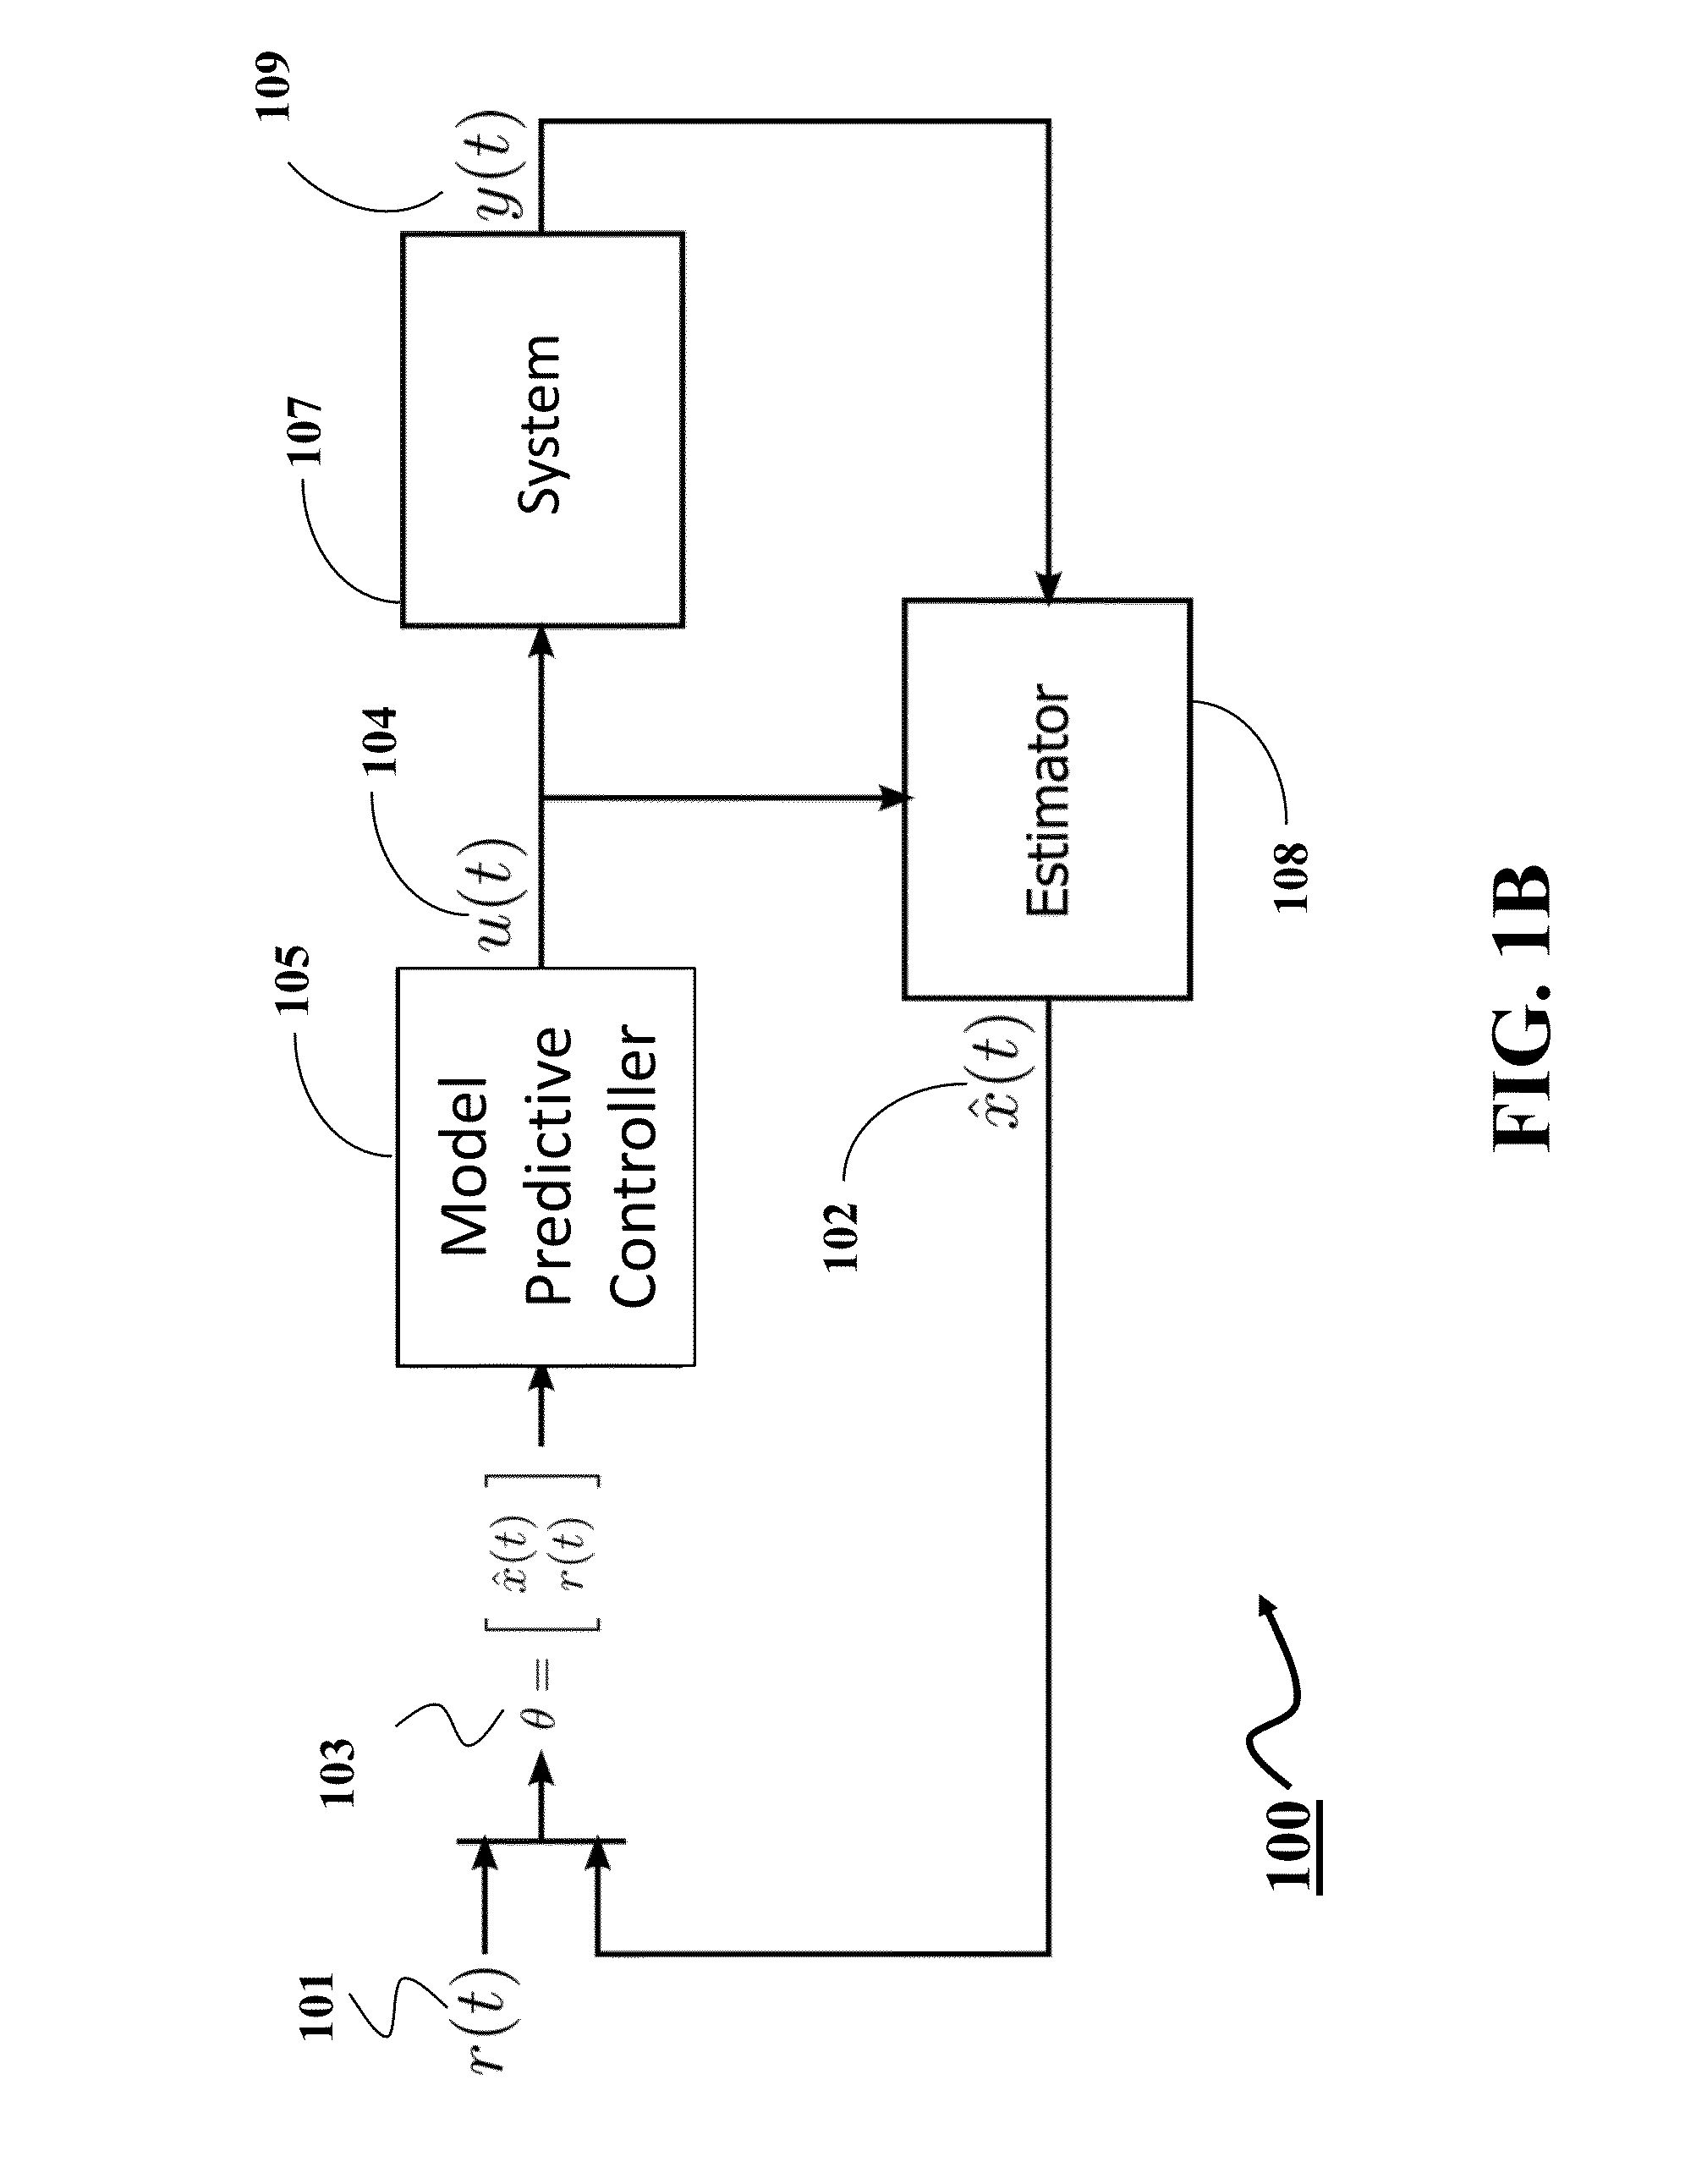 System and Method for Controlling System